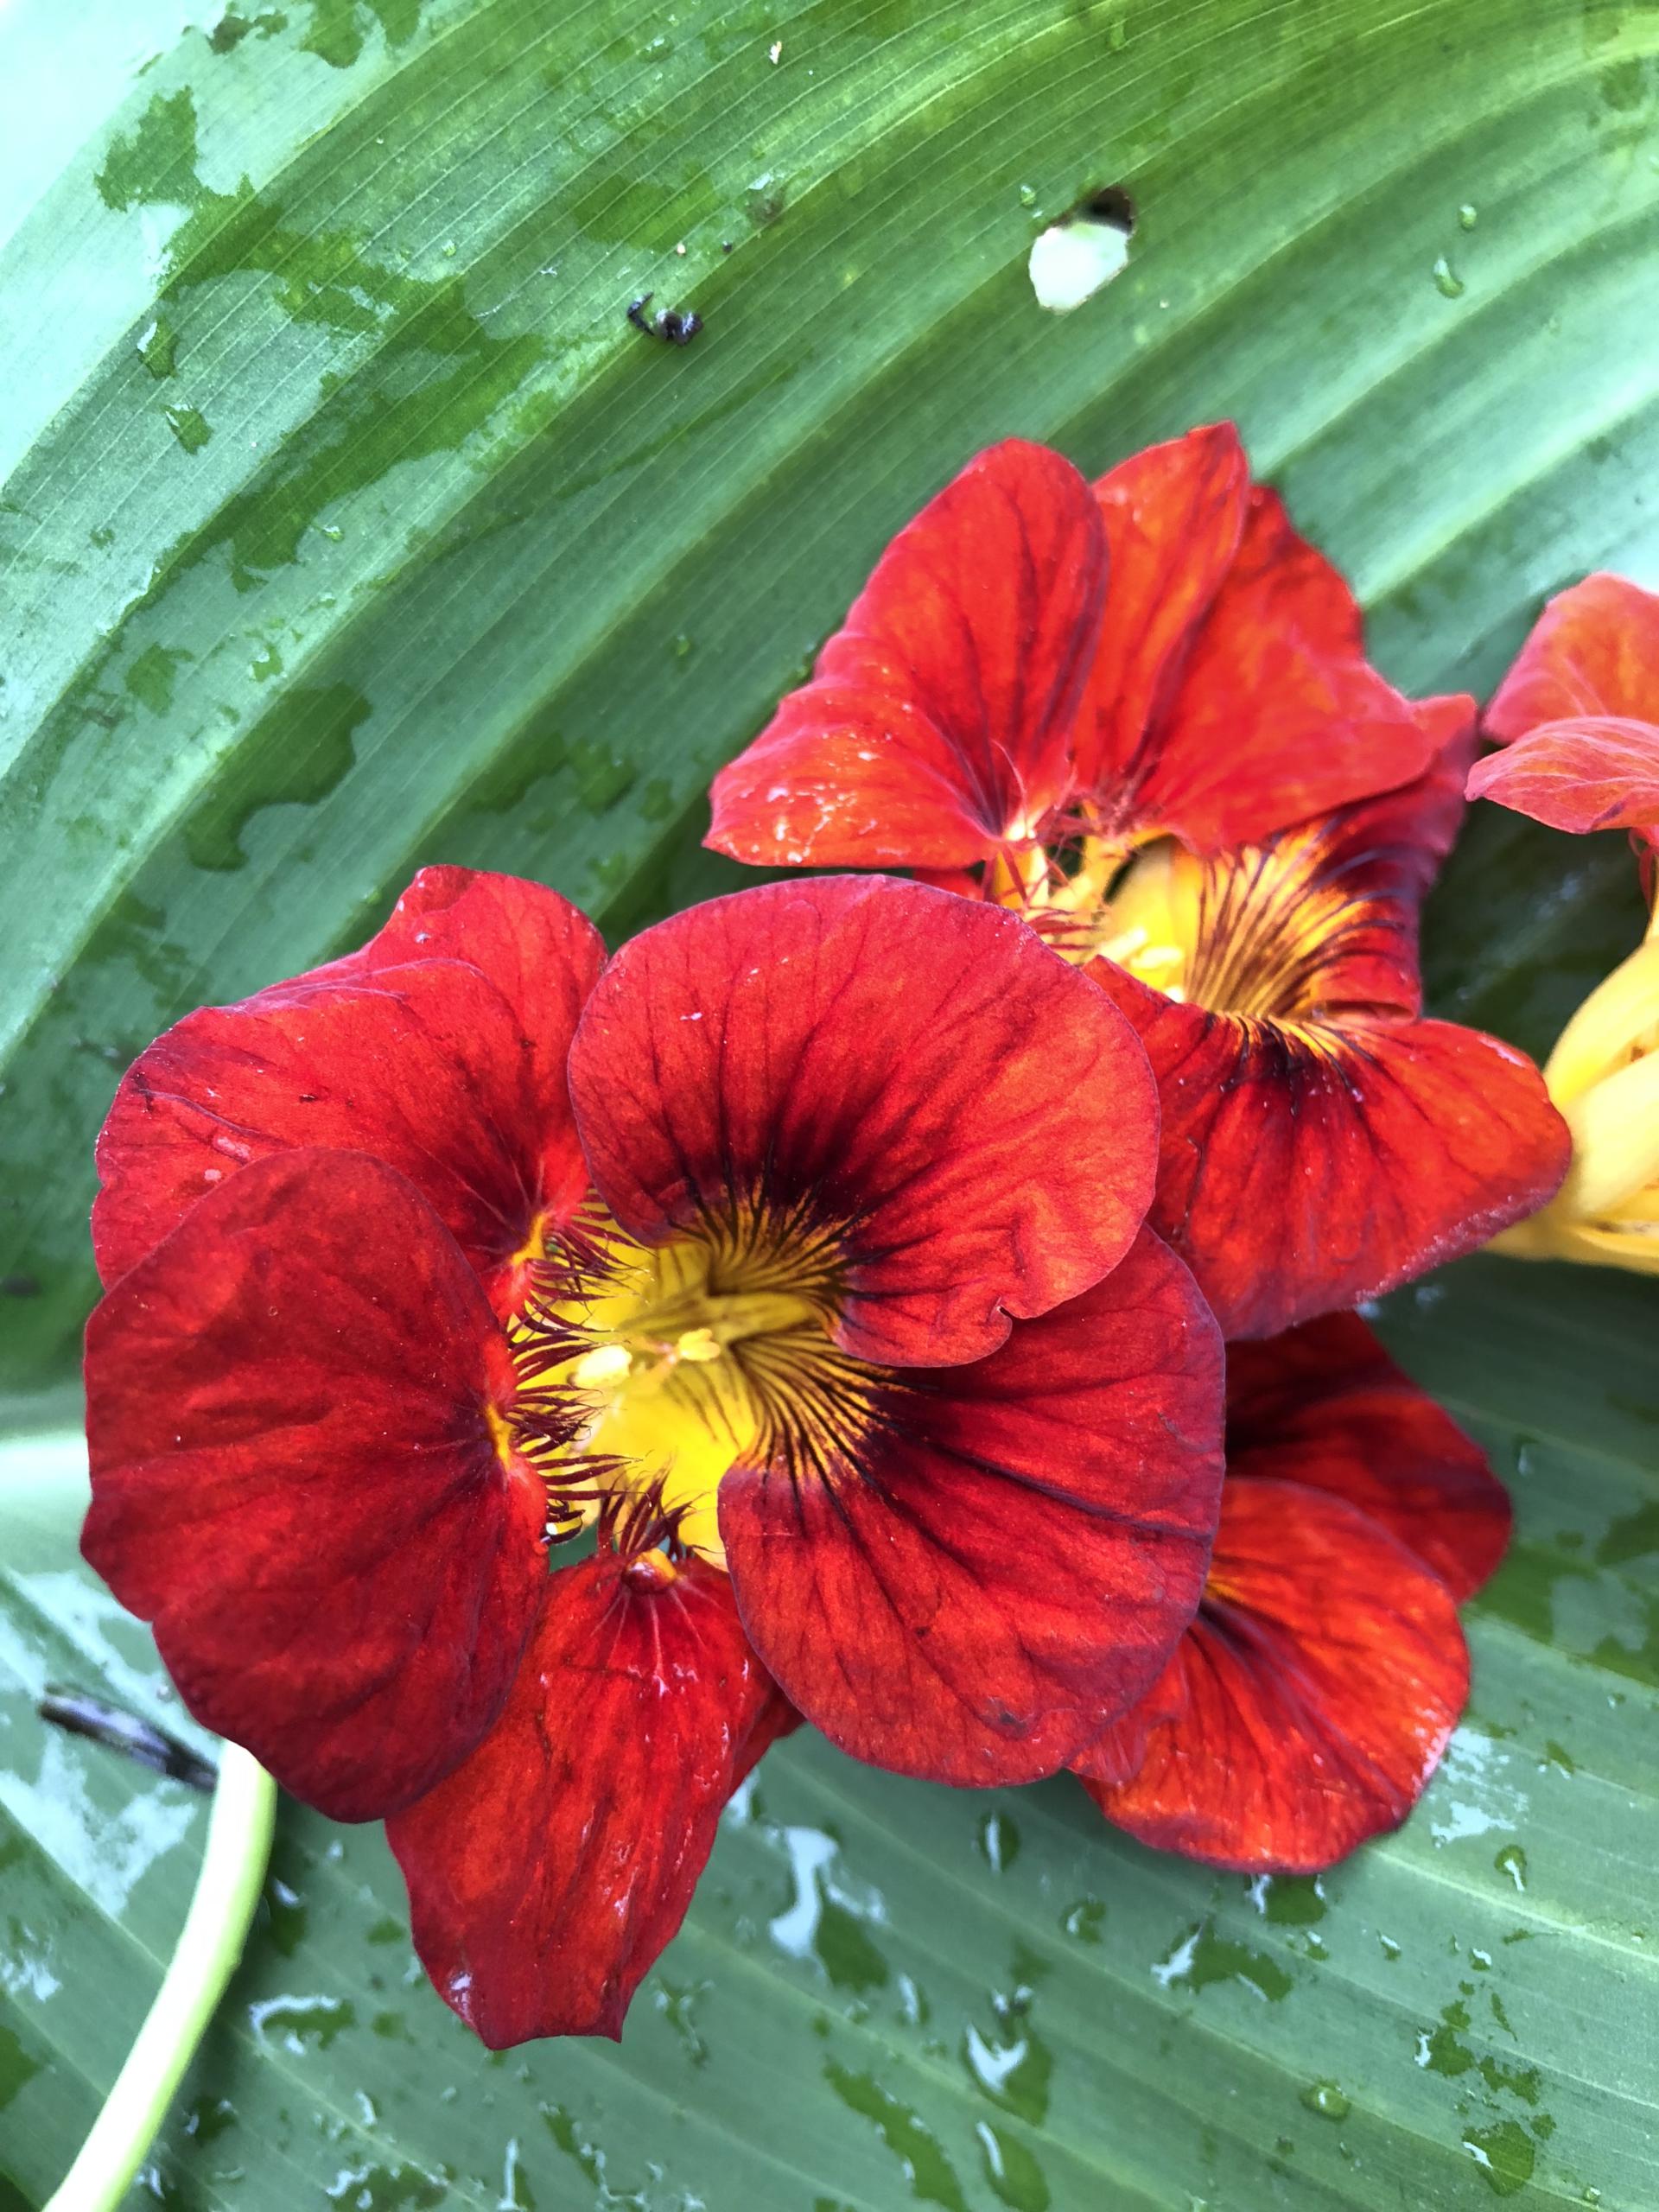 Racy Red Edible Flowers in the Garden – ecobotanica